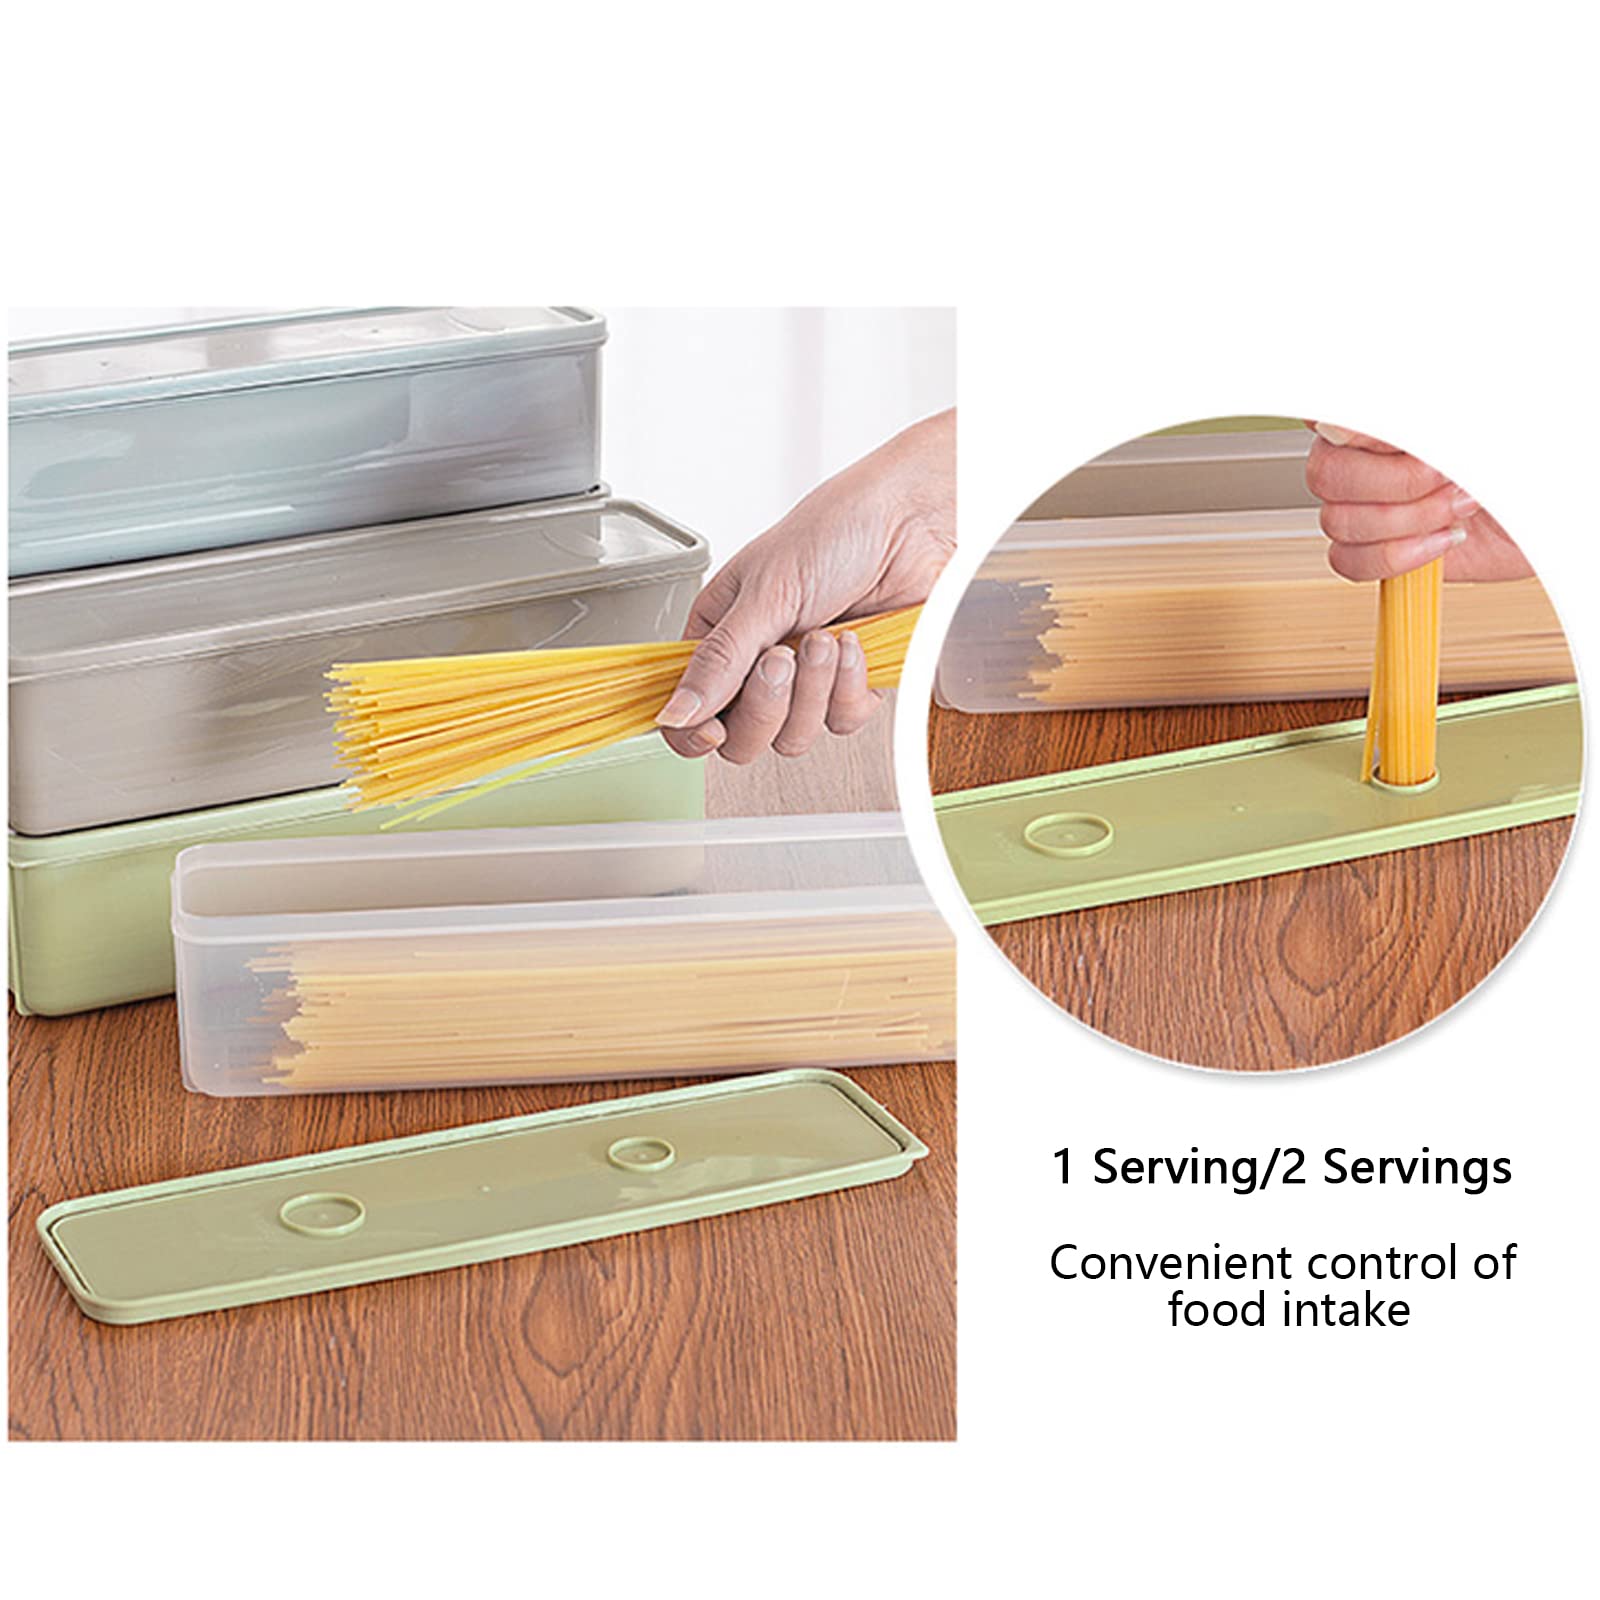 3PCS Rectangular Pasta Spaghetti Noodle Keeper Box with Cover,Pasta Canister Set,Dishwasher Safe (11.8x3.23x3.14inch)